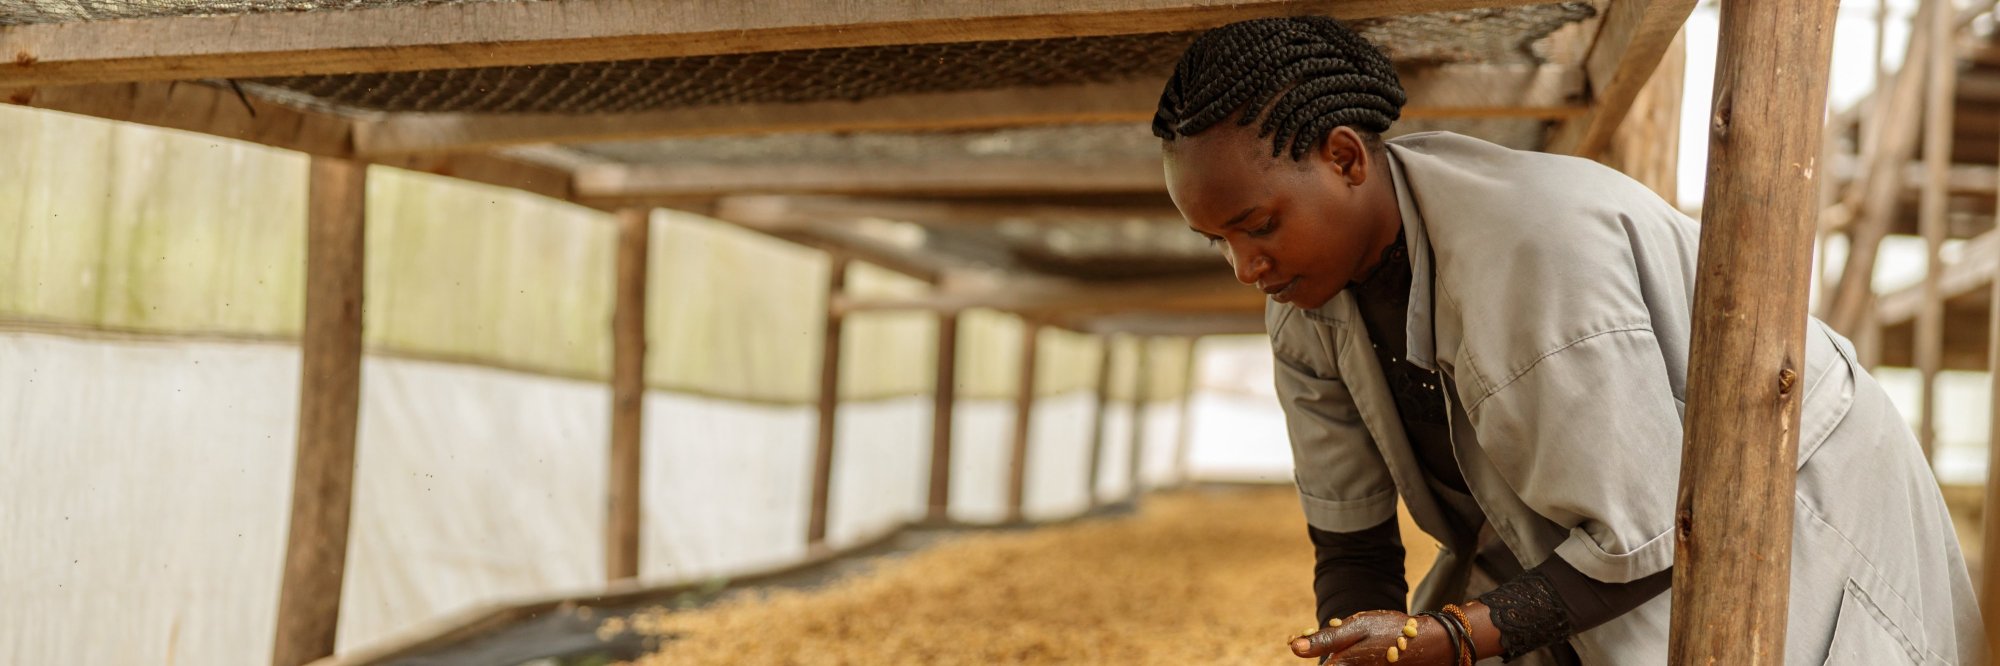 Improving working and health conditions in agriculture​